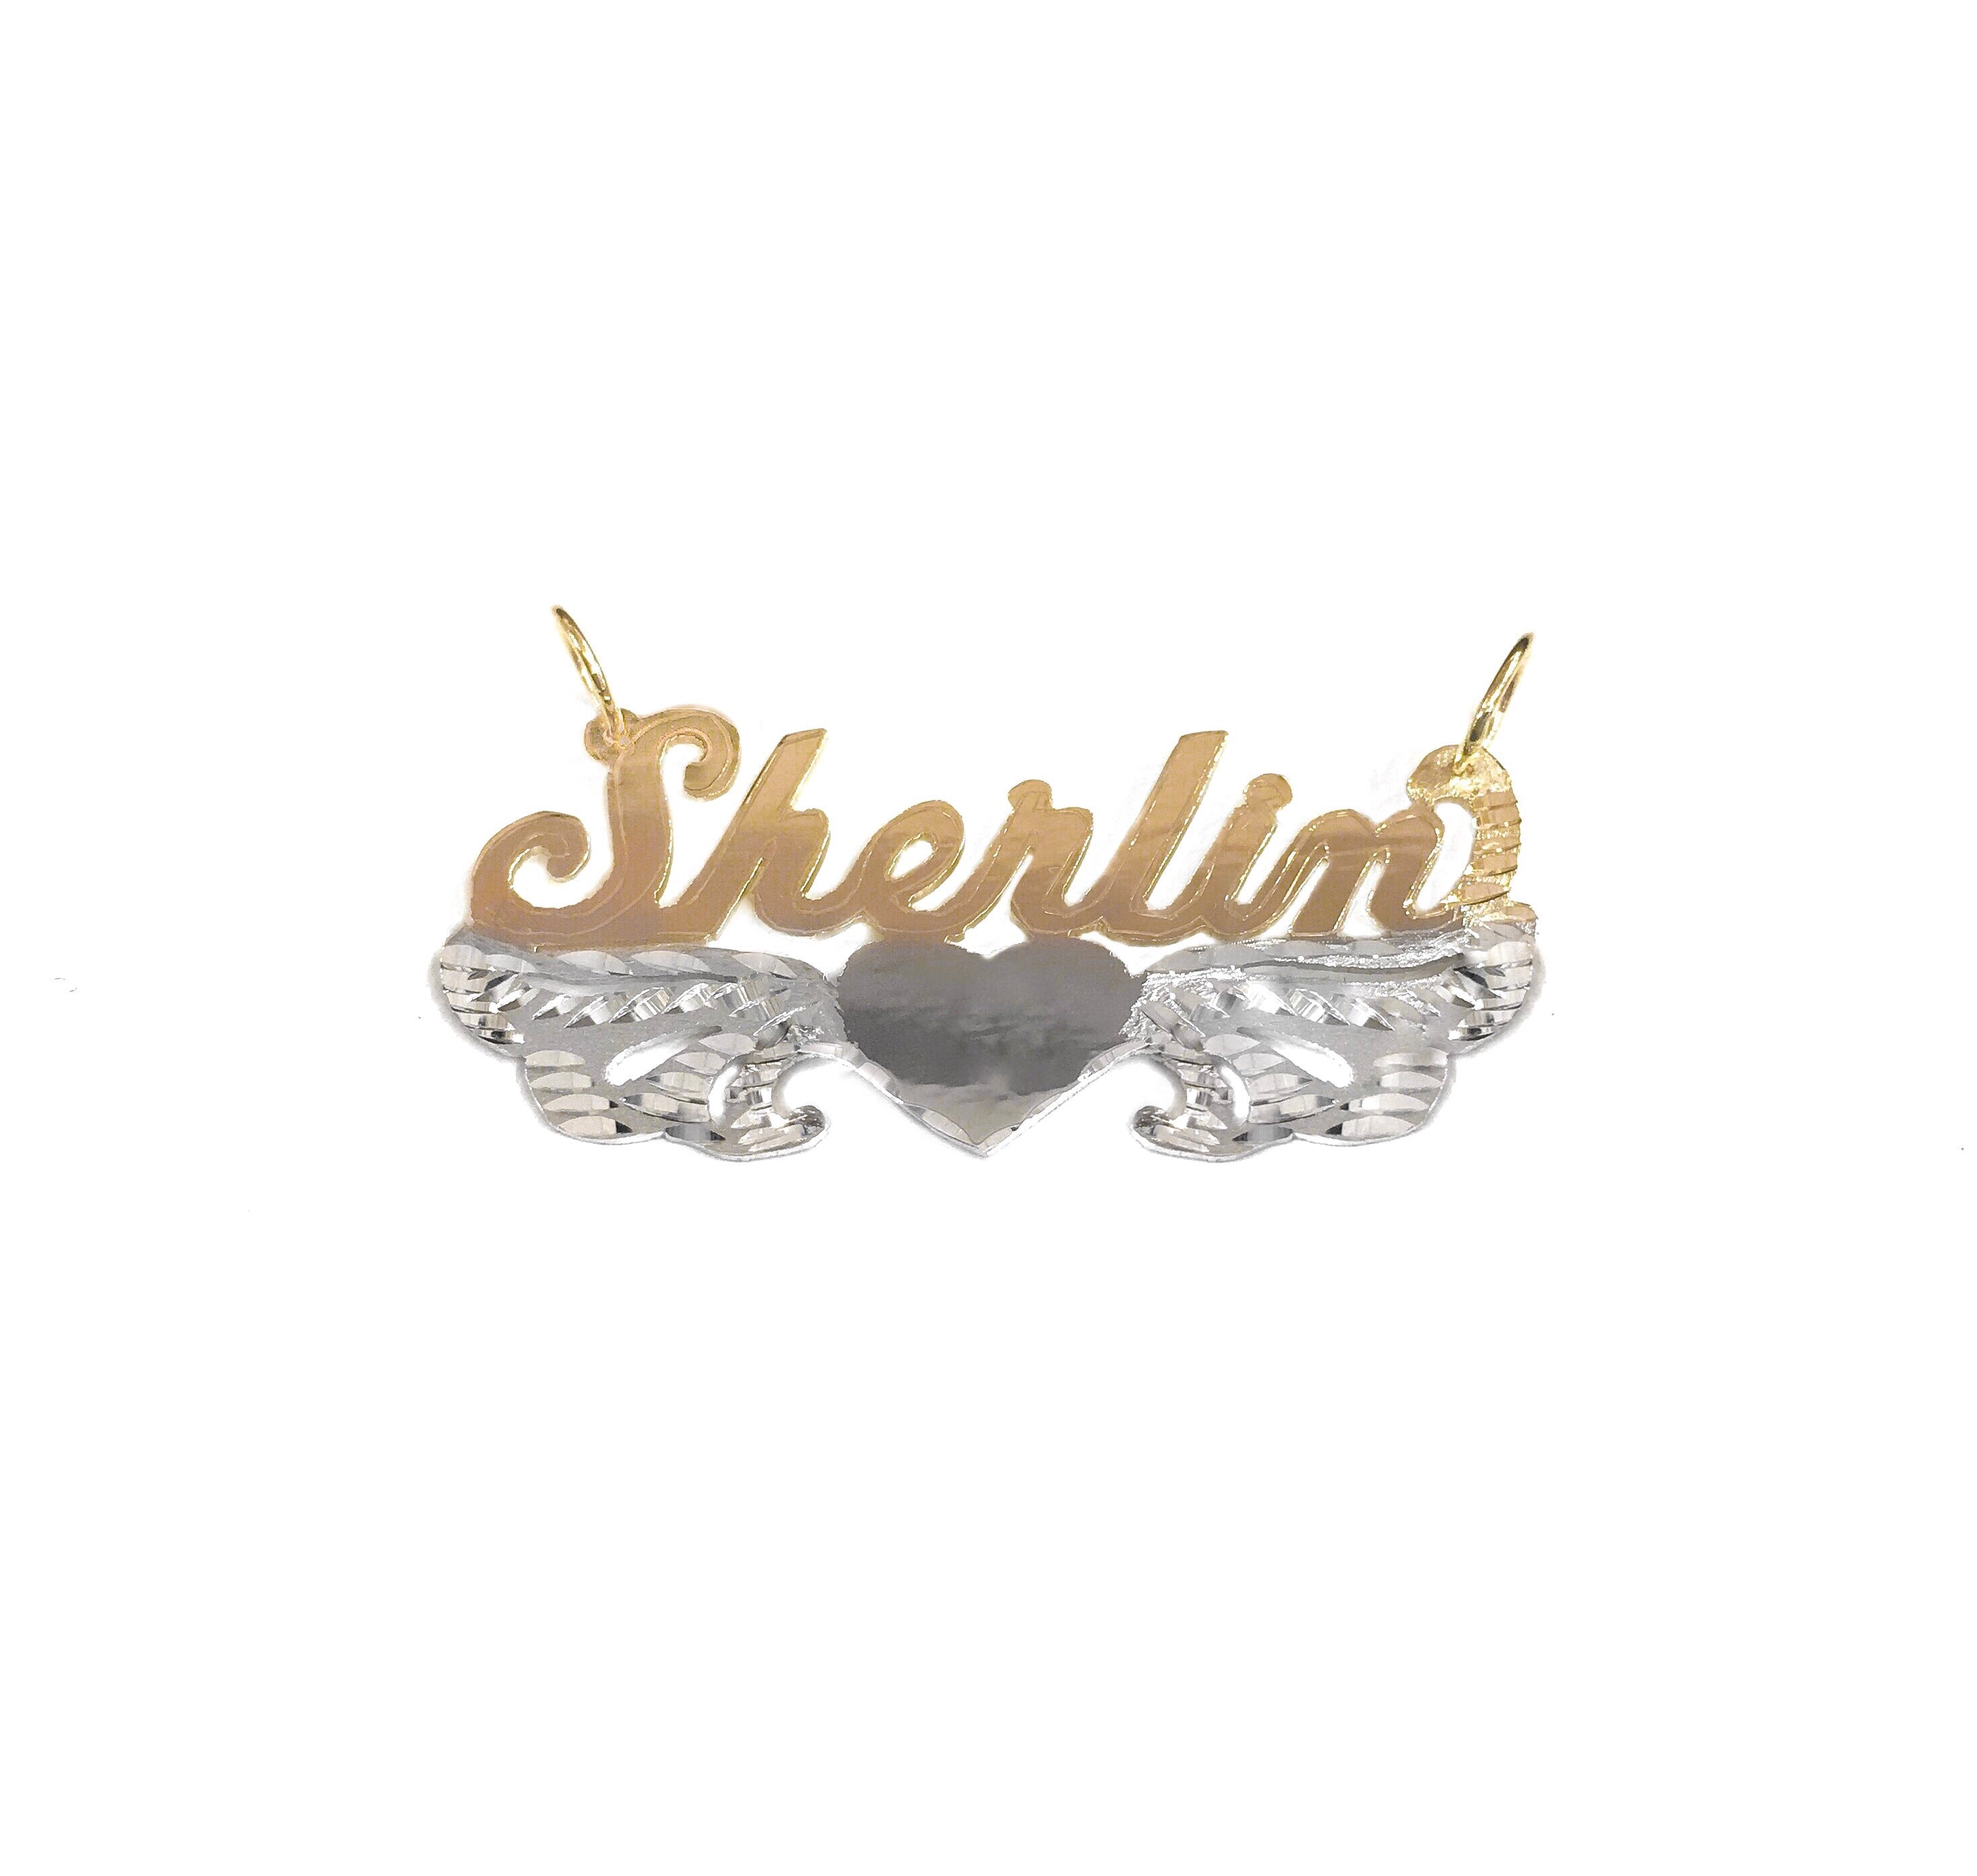 14K TWO TONED GOLD HEAVENLY NAME PLATE